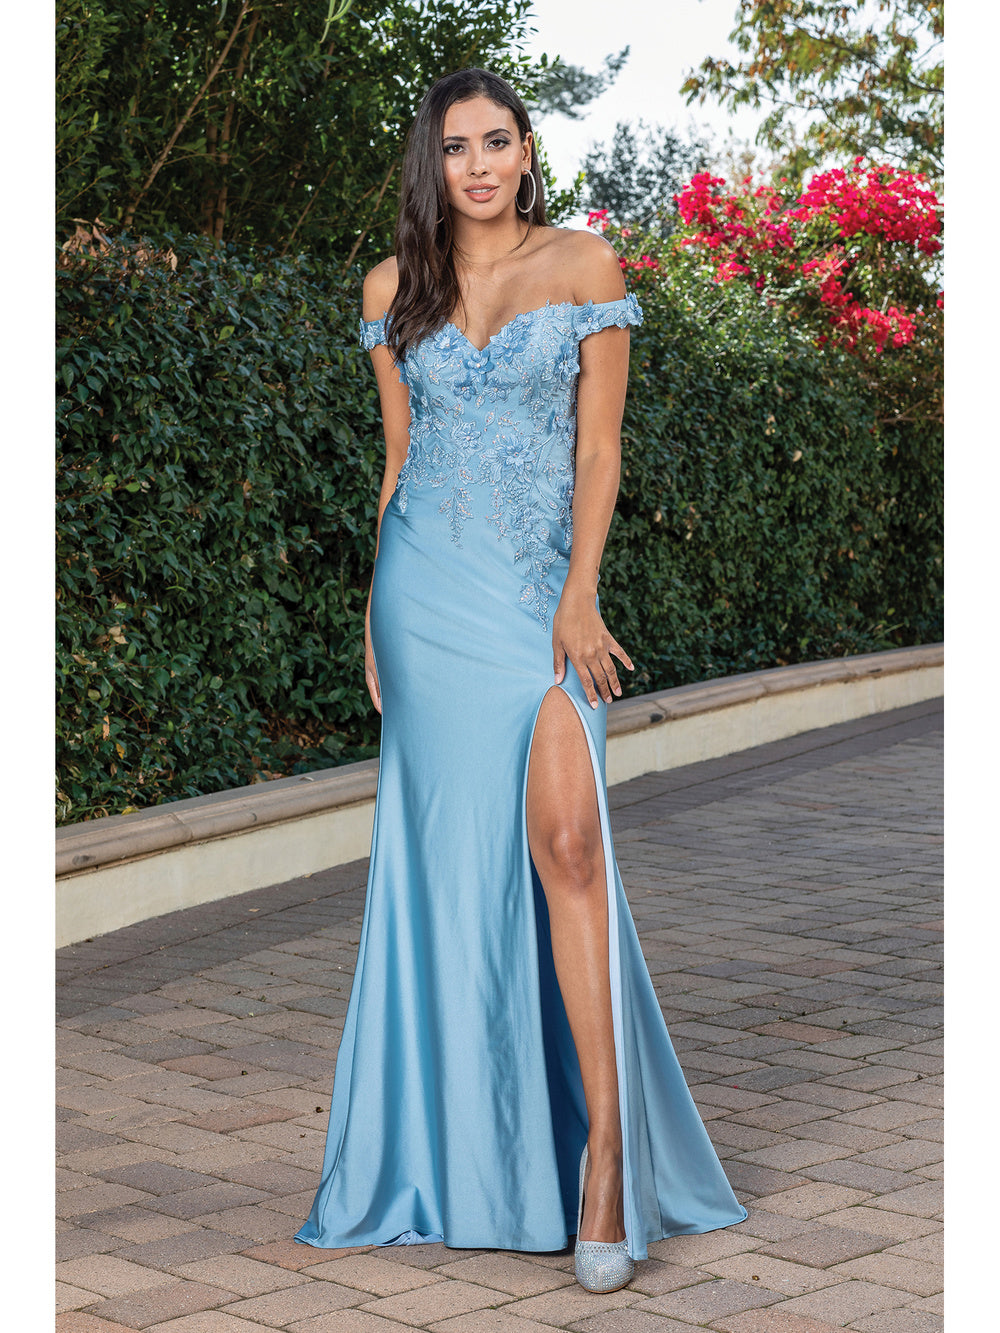 DQ 4291 - Off The Shoulder Fit & Flare Prom Gown With Floral Applique Bodice and Leg Slit PROM GOWN Dancing Queen XS DUSTY BLUE 